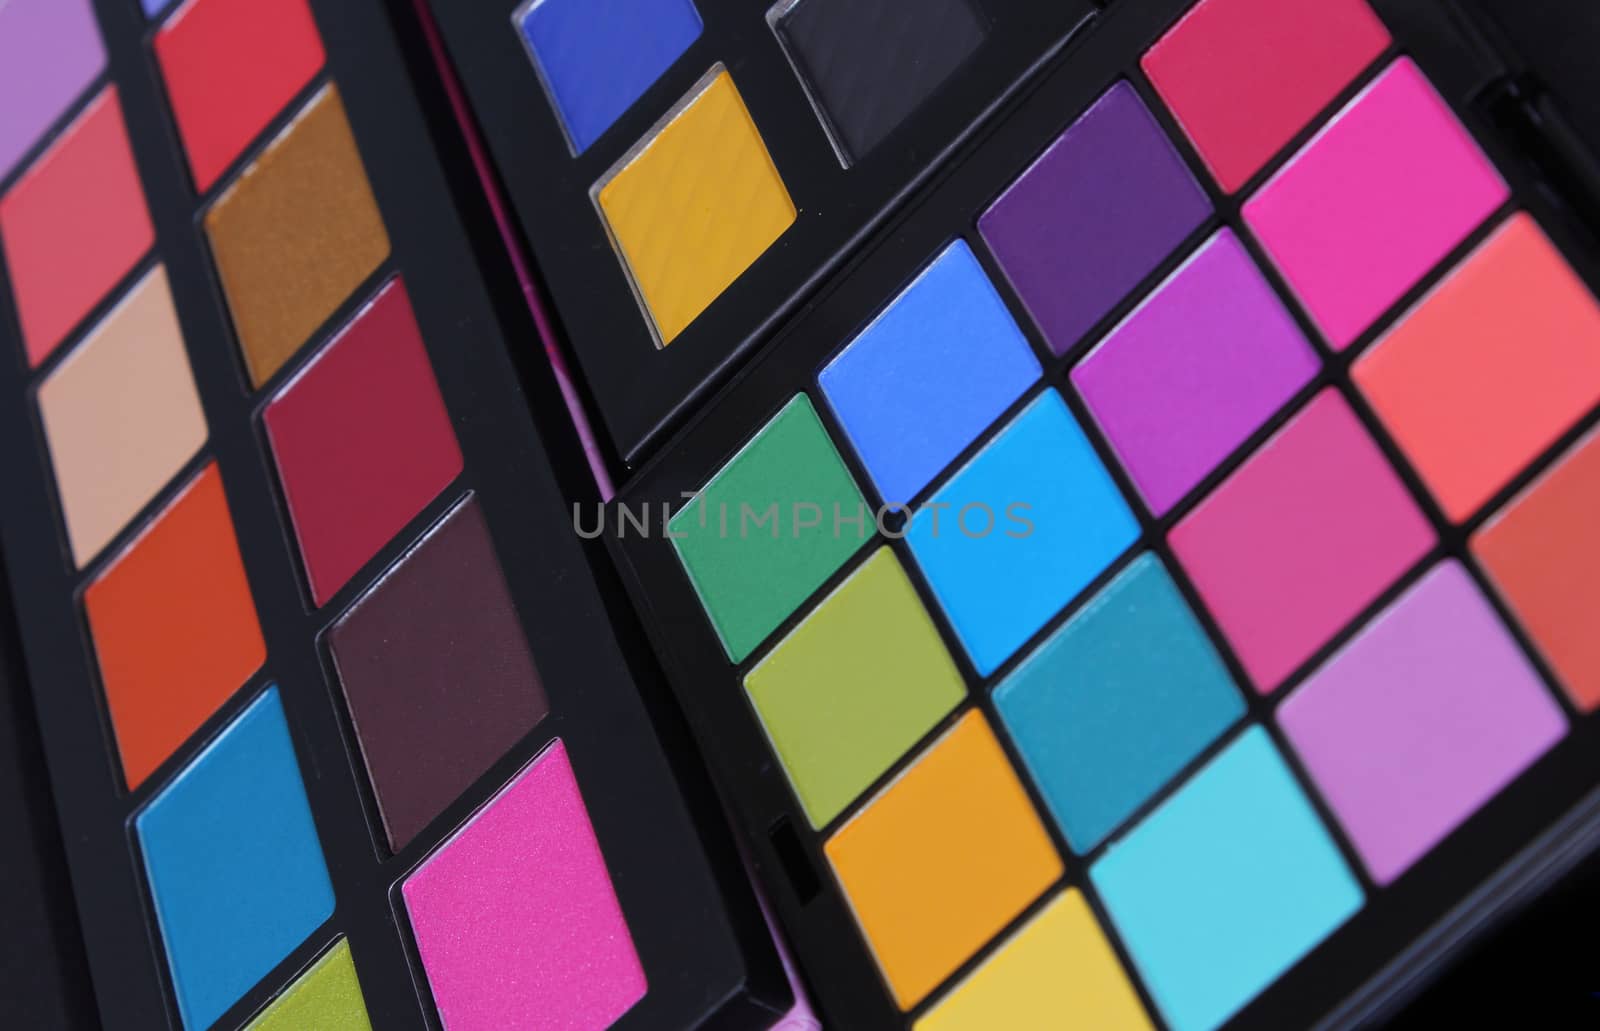 Colorful Cosmetics Pigment palette by Marti157900